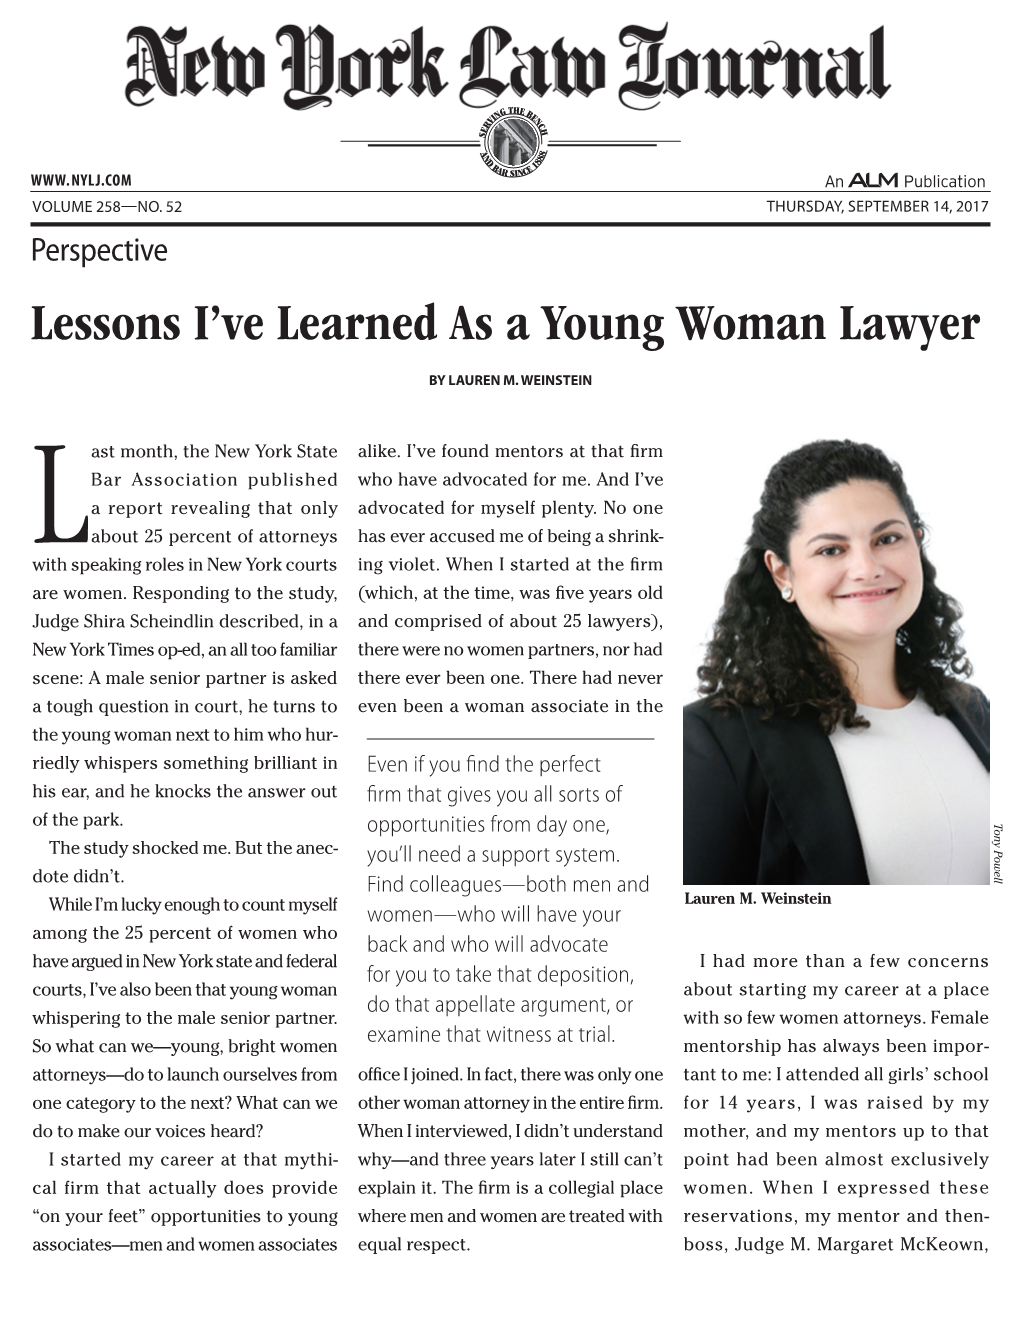 Lessons I've Learned As a Young Woman Lawyer